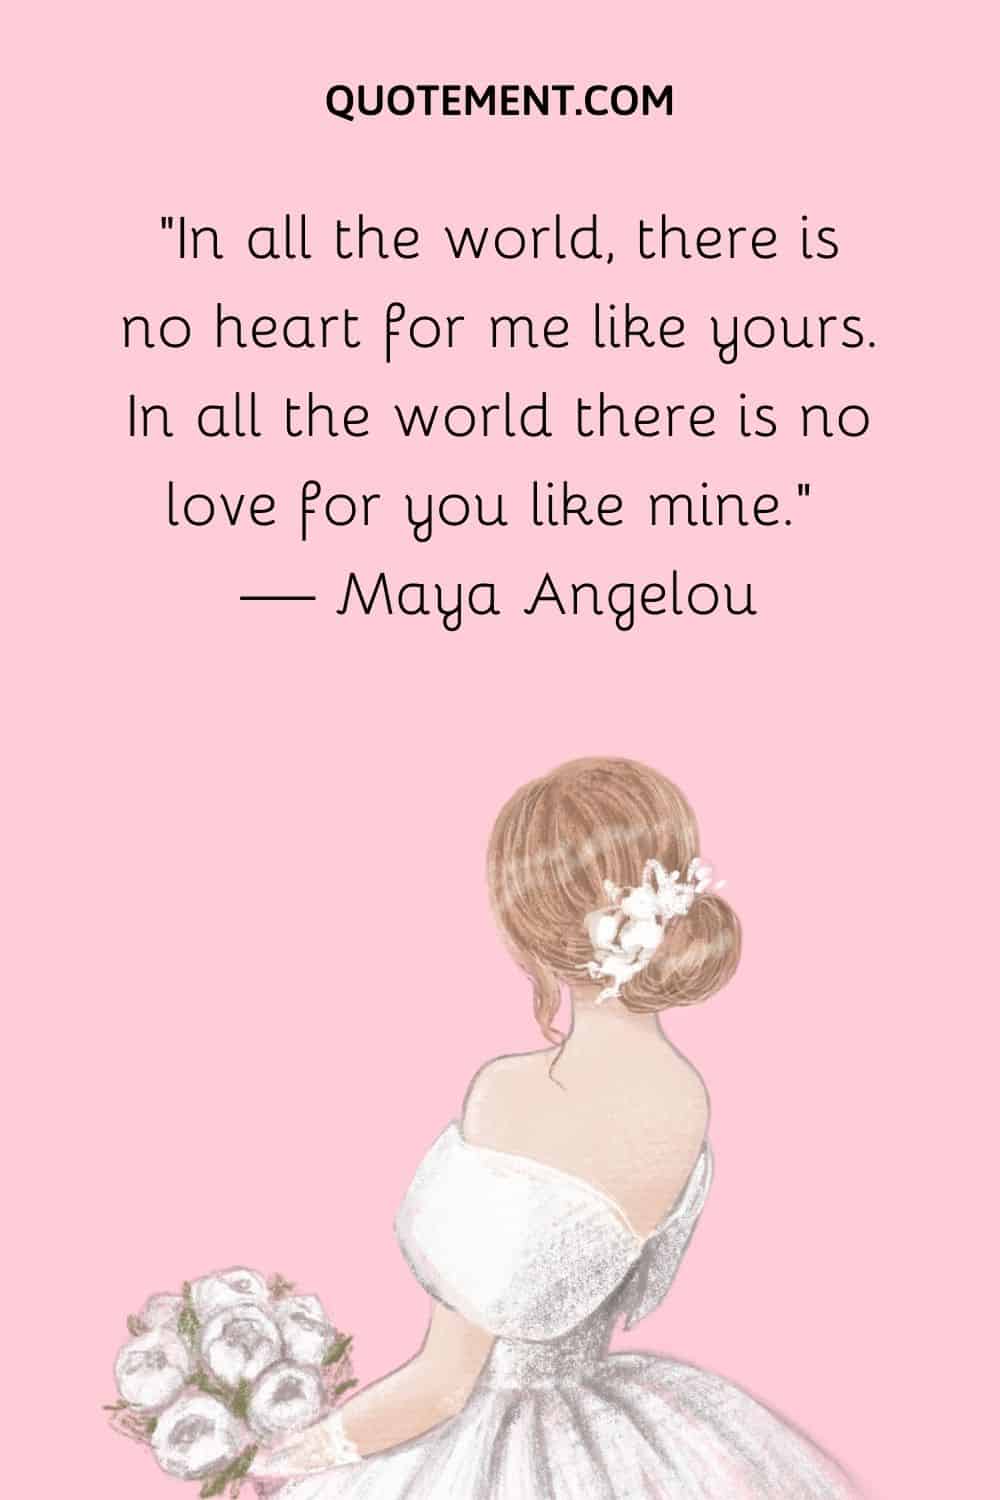 In all the world, there is no heart for me like yours. In all the world there is no love for you like mine.” — Maya Angelou